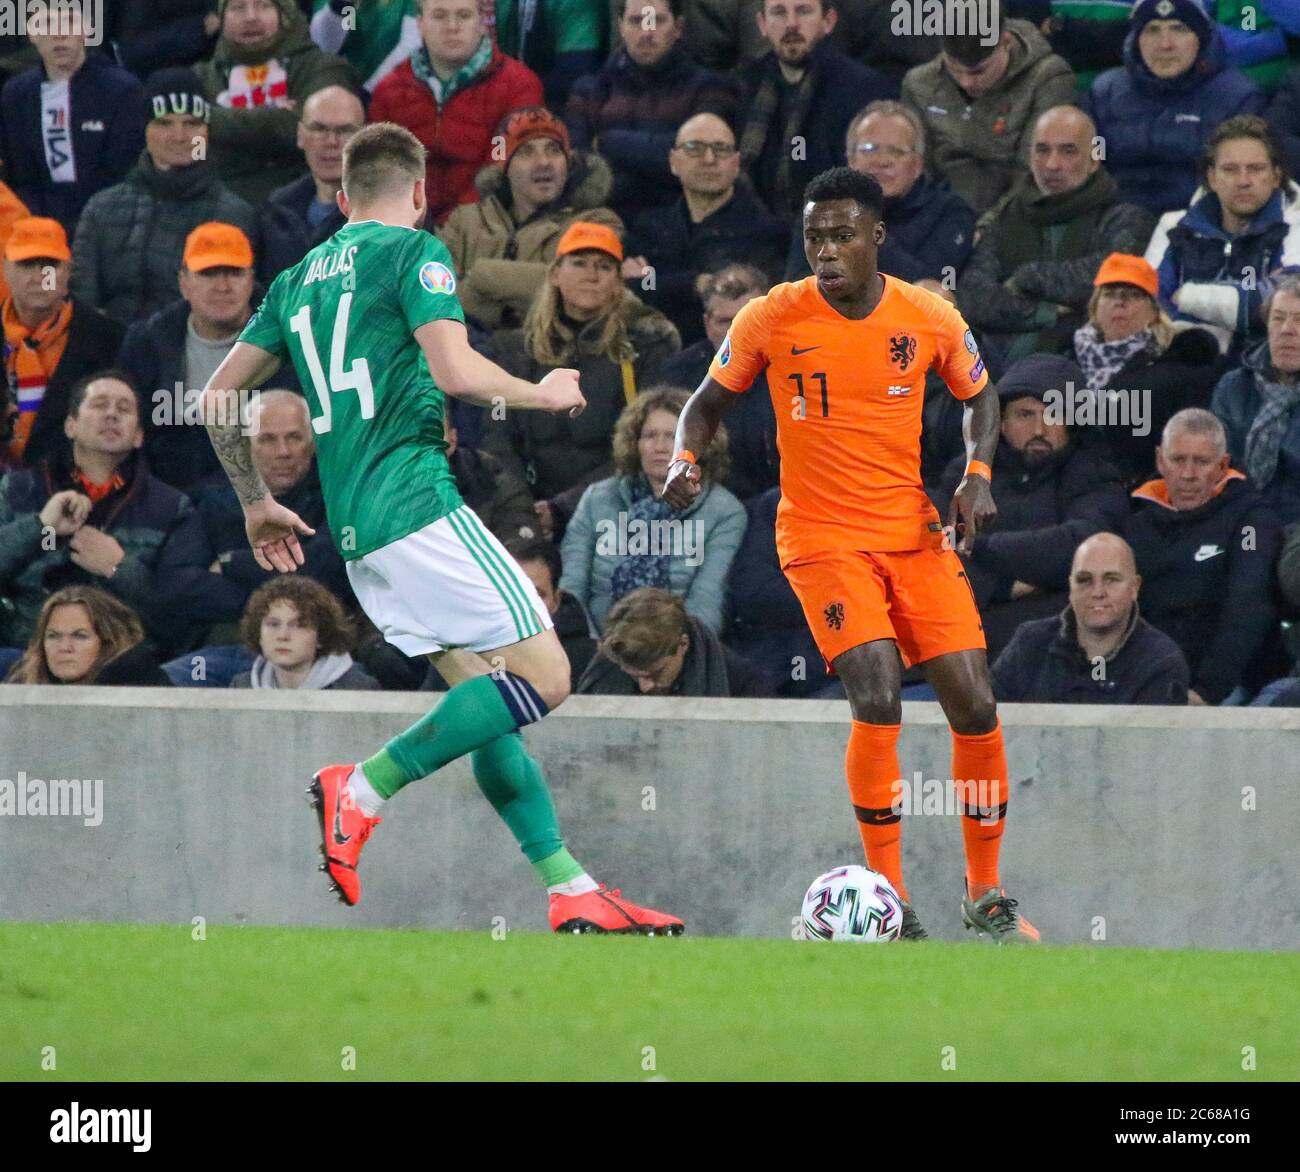 16 November 2019. UEFA Euro 2020 Qualifier at National Football Stadium at Windsor Park, Belfast. Northern Ireland 0 Netherlands 0. Netherlands international football player Quincy Promes in action for the Netherlands. Stock Photo